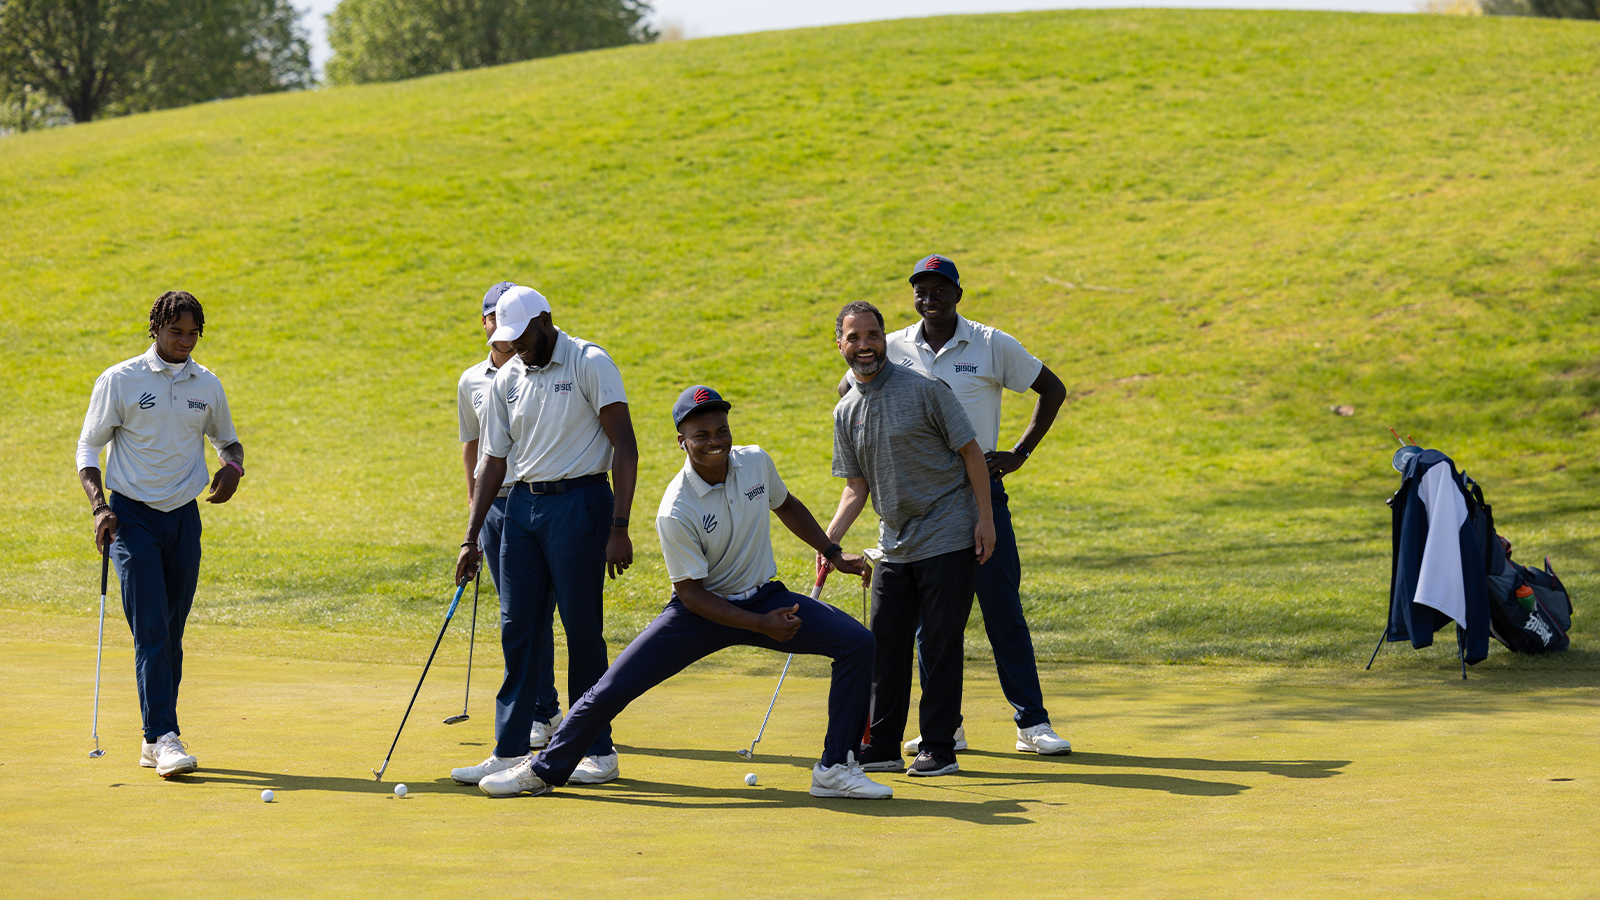 Howard University practices before the first round for the 2022 PGA Works Collegiate Championship at The Union League Liberty Hill on May 2, 2022 in Philadelphia, Pennsylvania. (Photo by Matt Hahn/PGA of America)